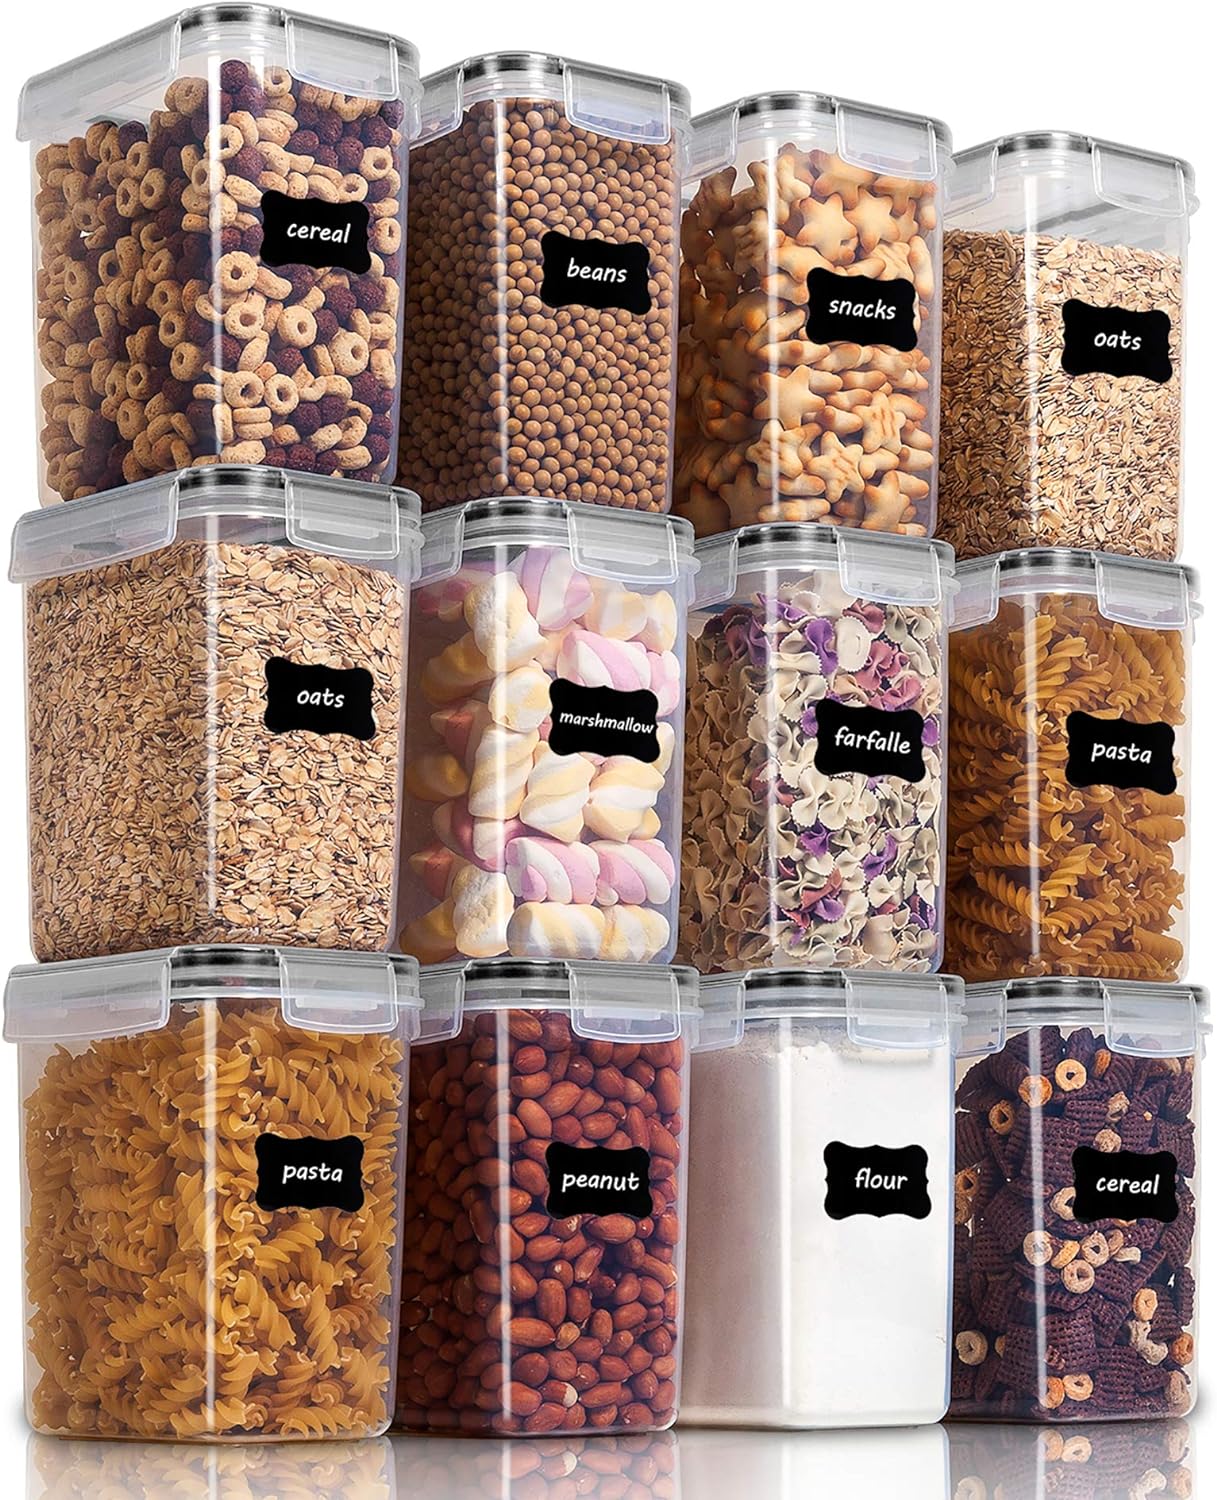 Vtopmart Airtight Food Storage Containers 12 Pieces 1.5qt / 1.6L- Plastic BPA Free Kitchen Pantry Storage Containers for Sugar, Flour and Baking Supplies - Dishwasher Safe - Include 24 Labels, Black